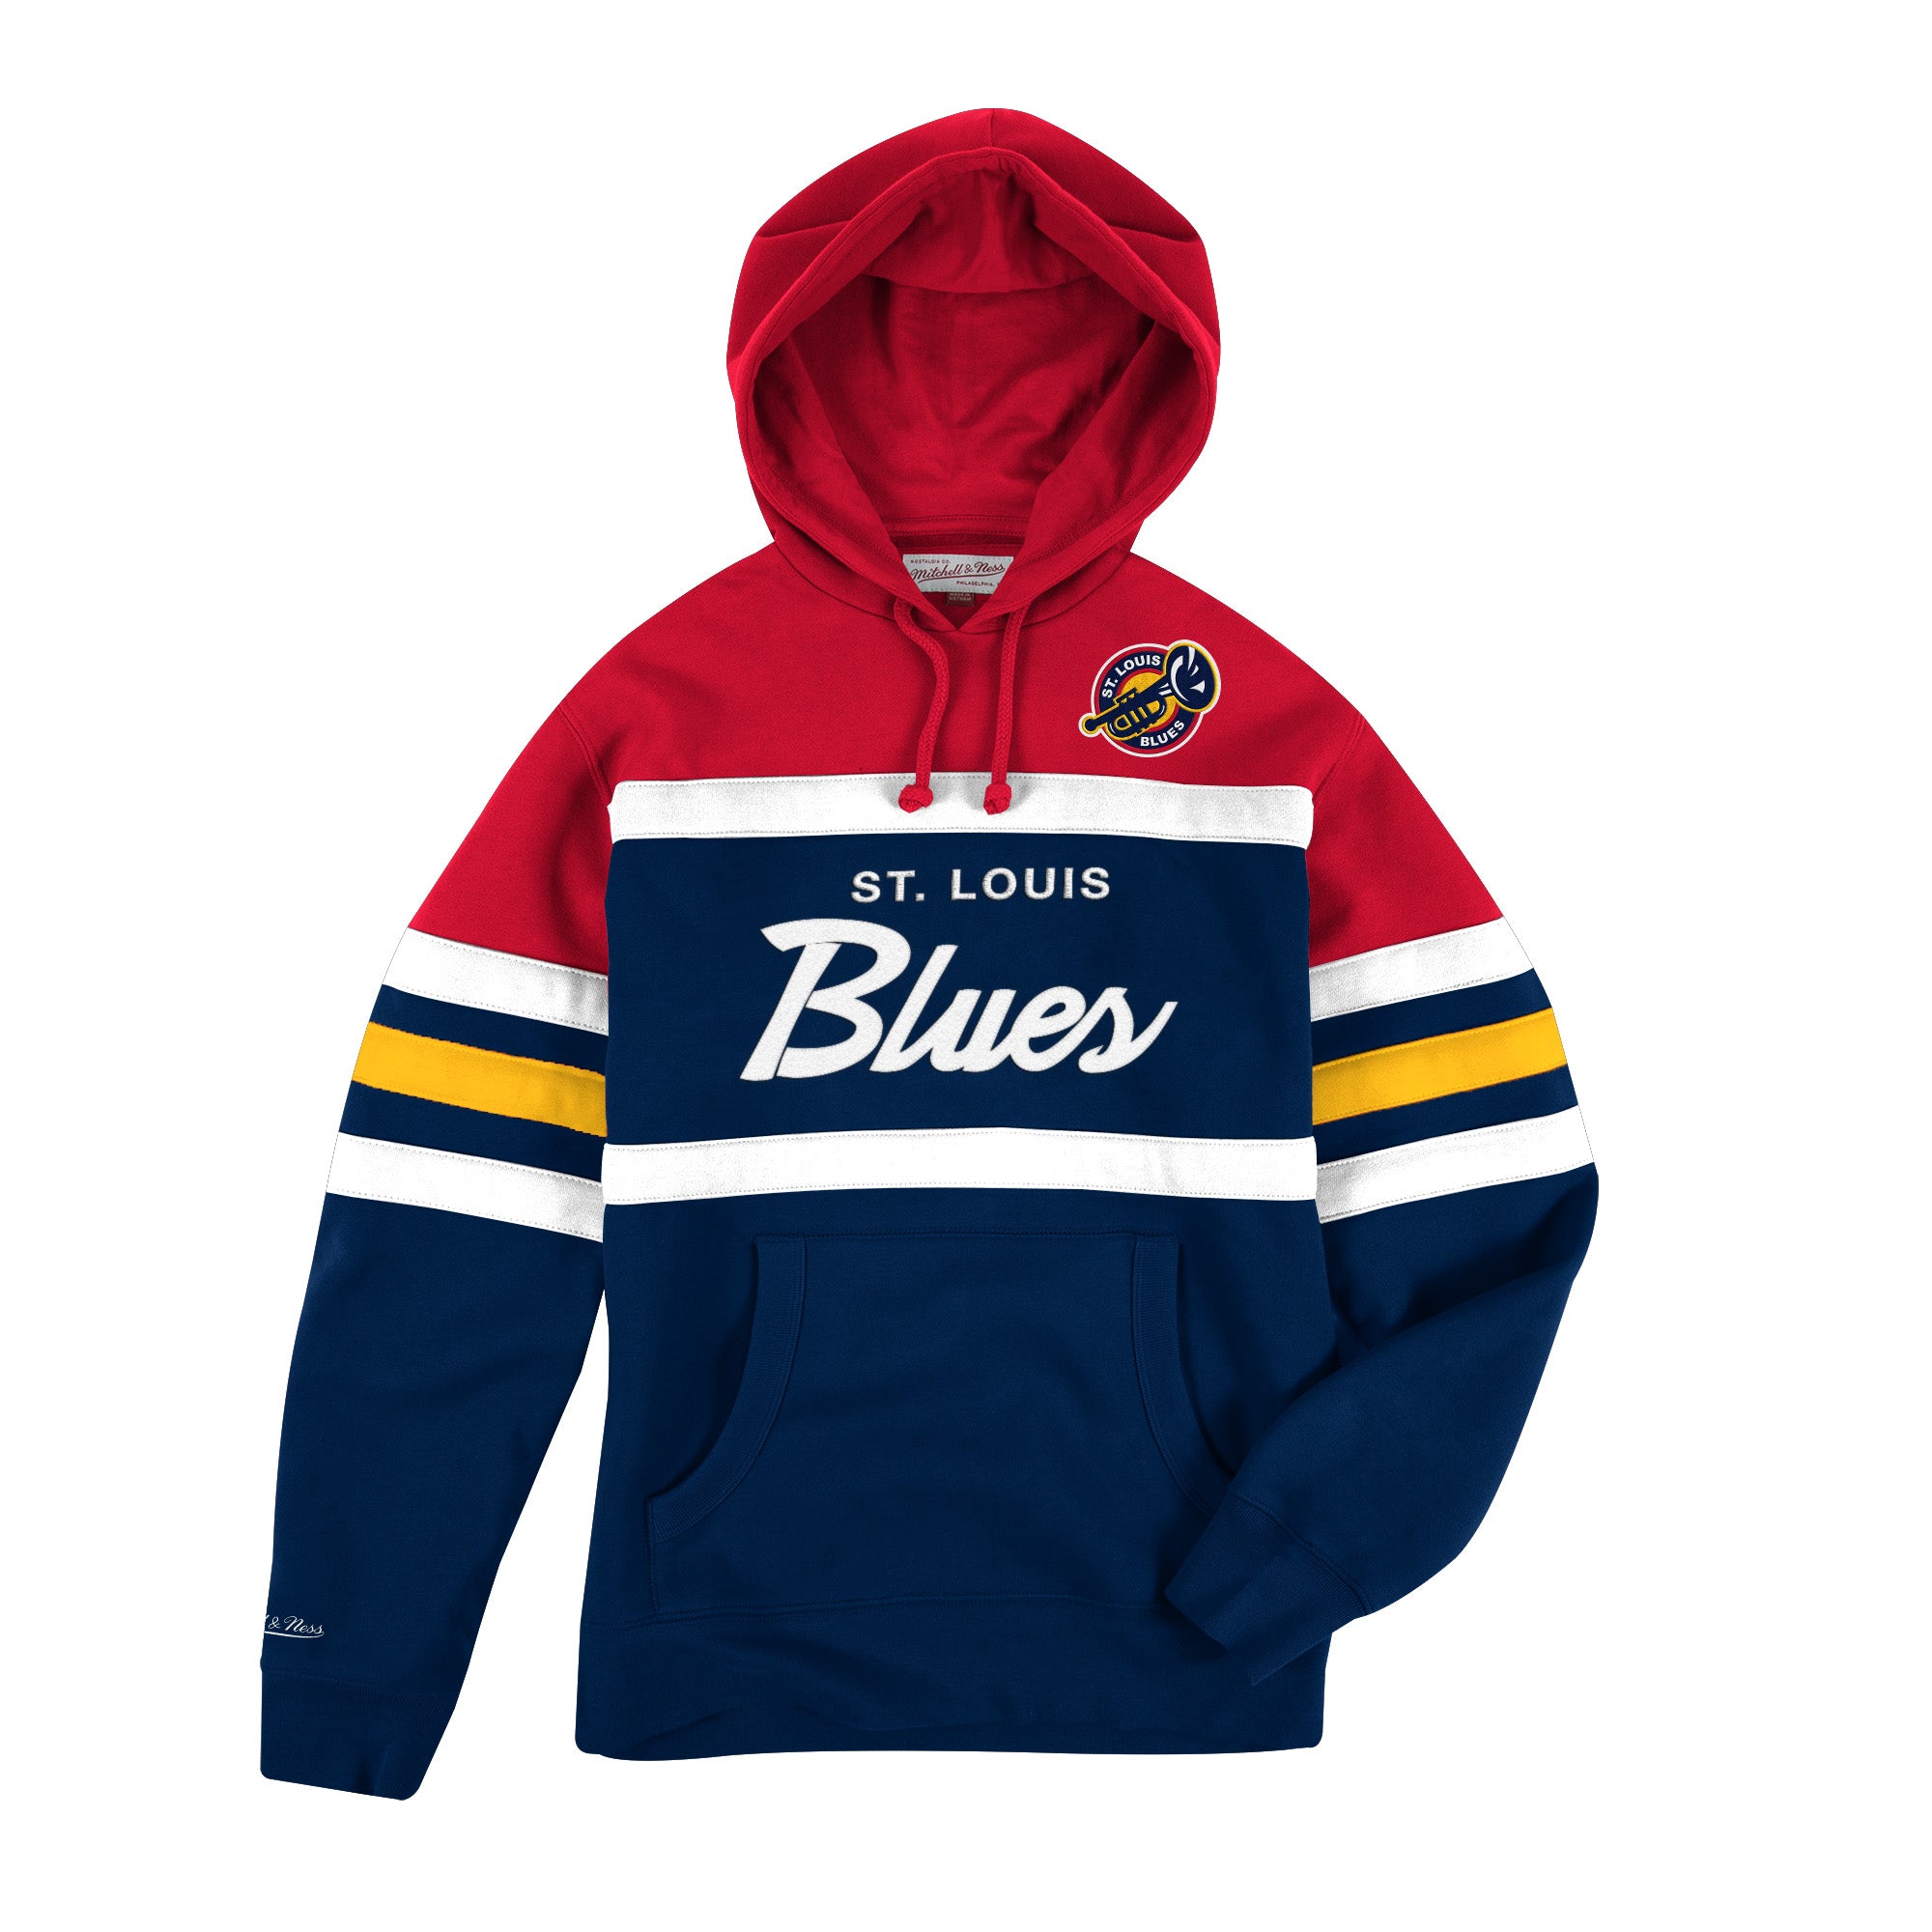 Mitchell & Ness Navy Boston Red Sox Head Coach Pullover Hoodie